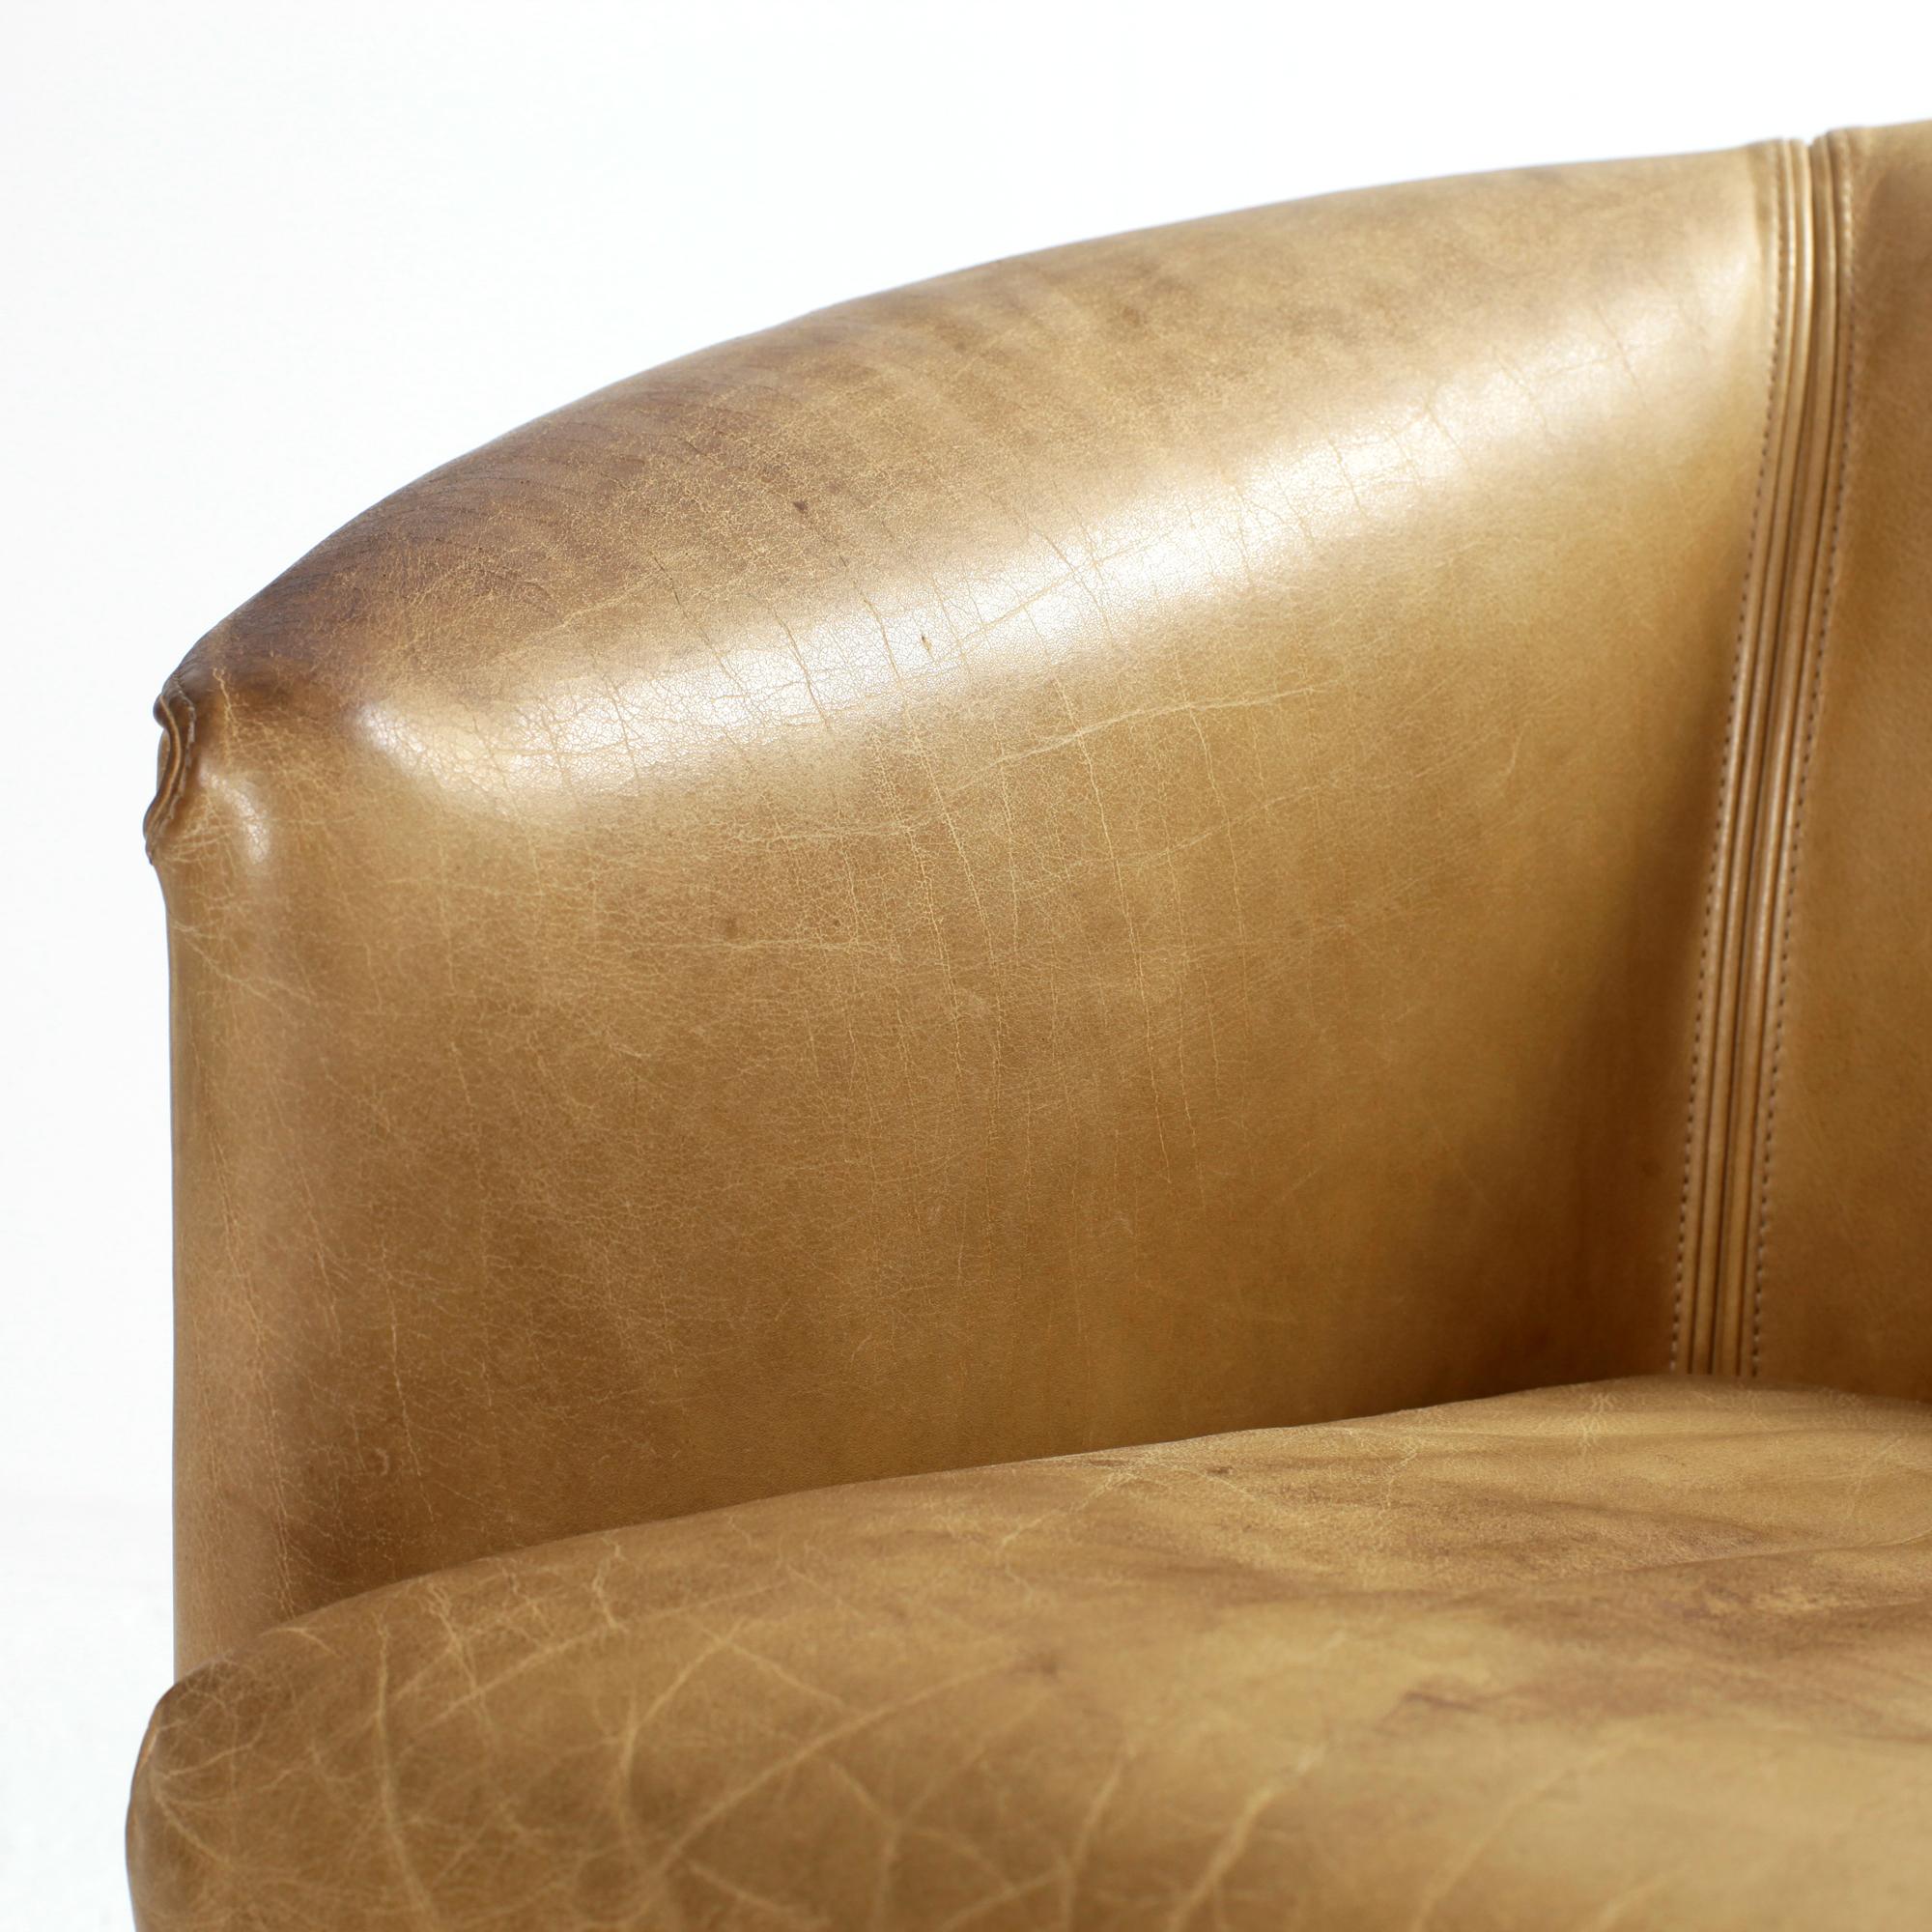 Paolo Piva Pair of Leather Cocktail Armchair Model Aura for Wittmann 1980s For Sale 3